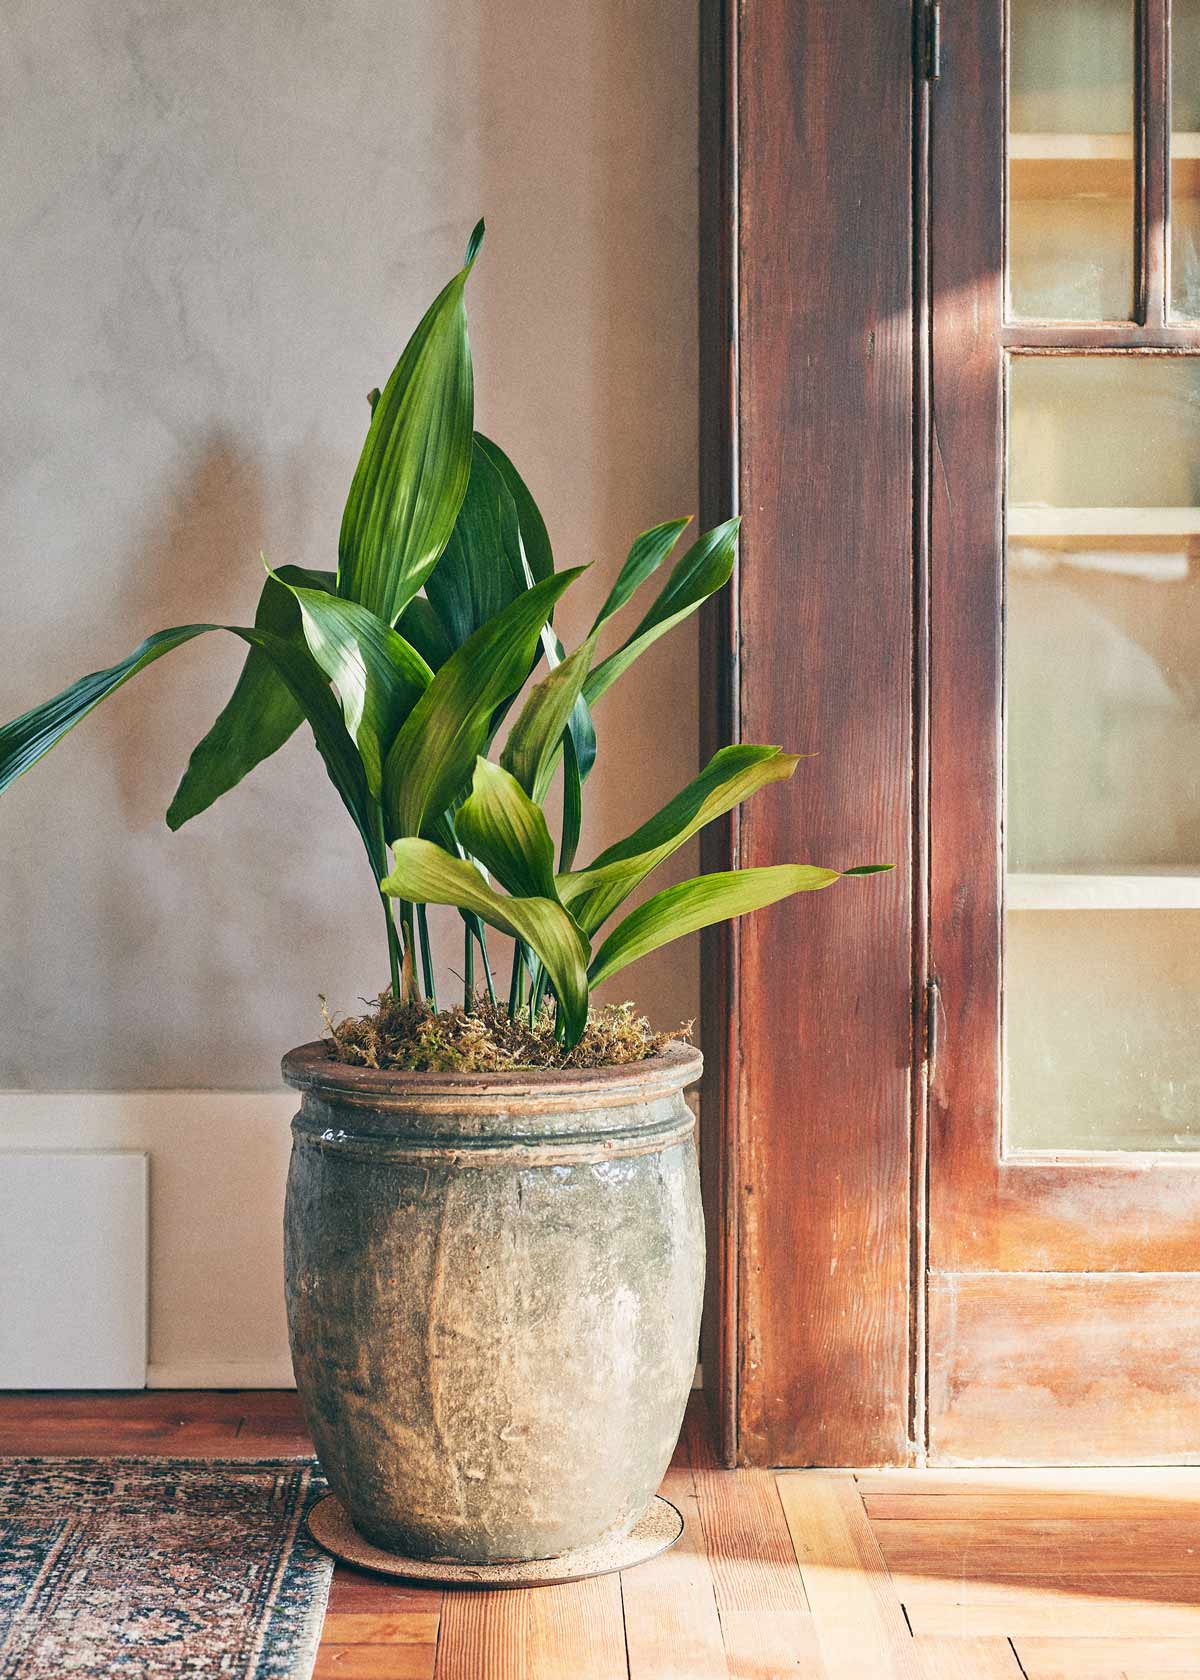 Cast iron plant in a clay planter beside a bookshelf